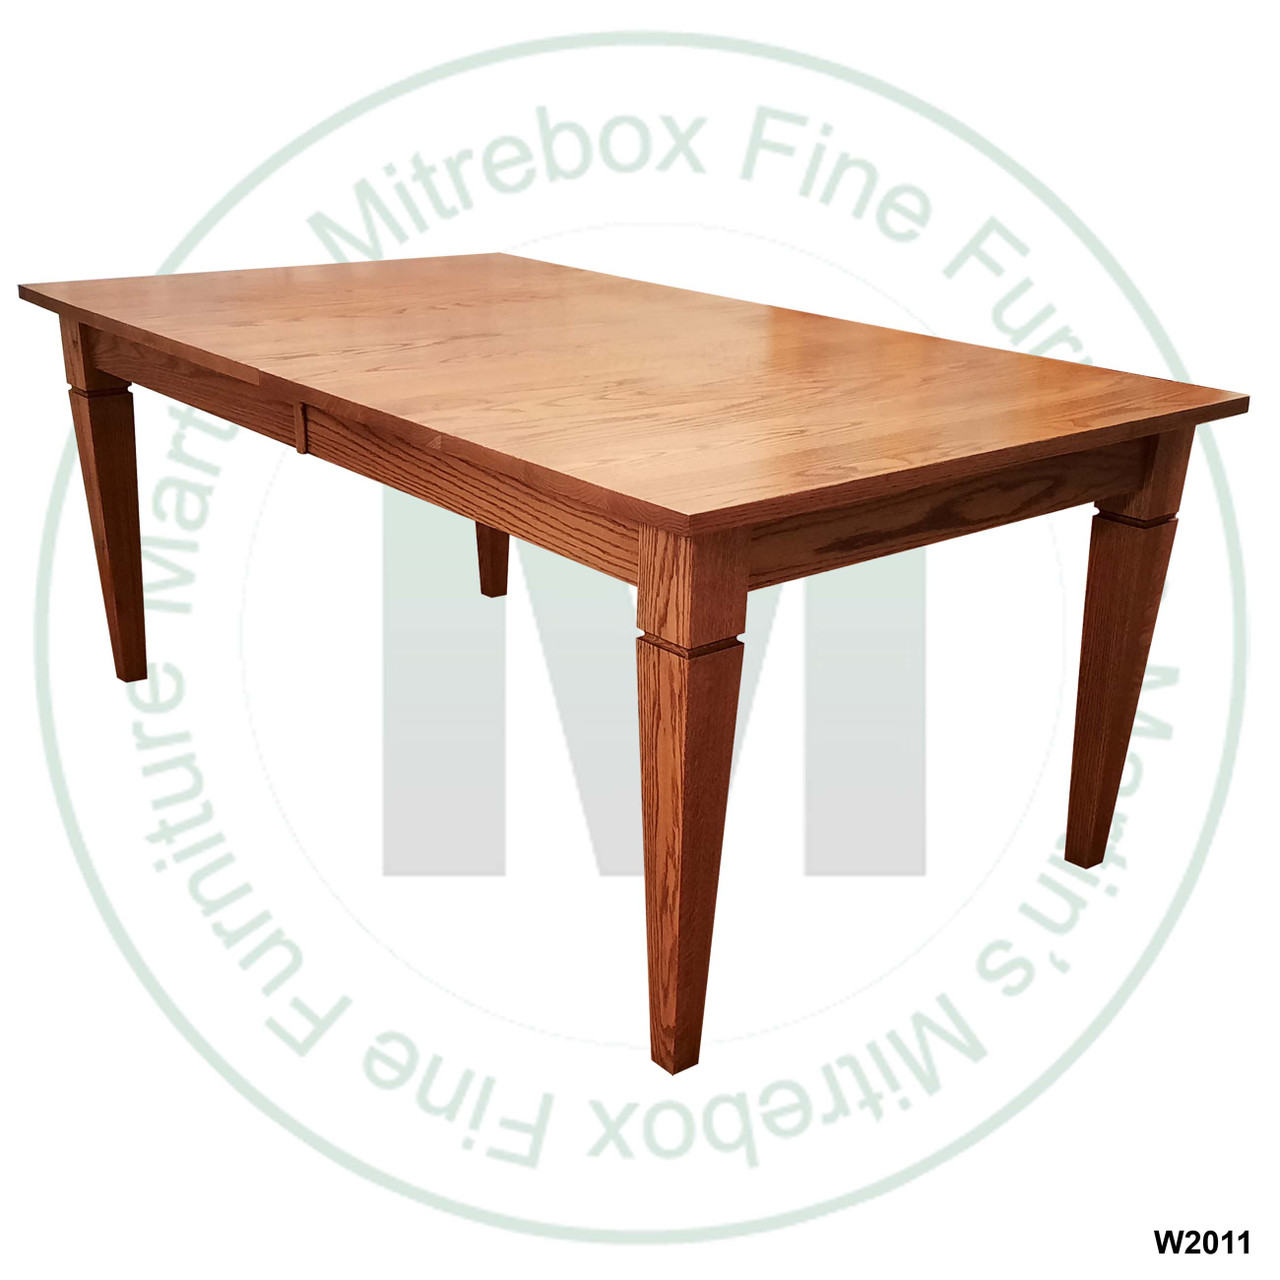 Oak Reesor Solid Top Harvest Table 48''D x 108''W x 30''H Table Has 1'' Thick Top